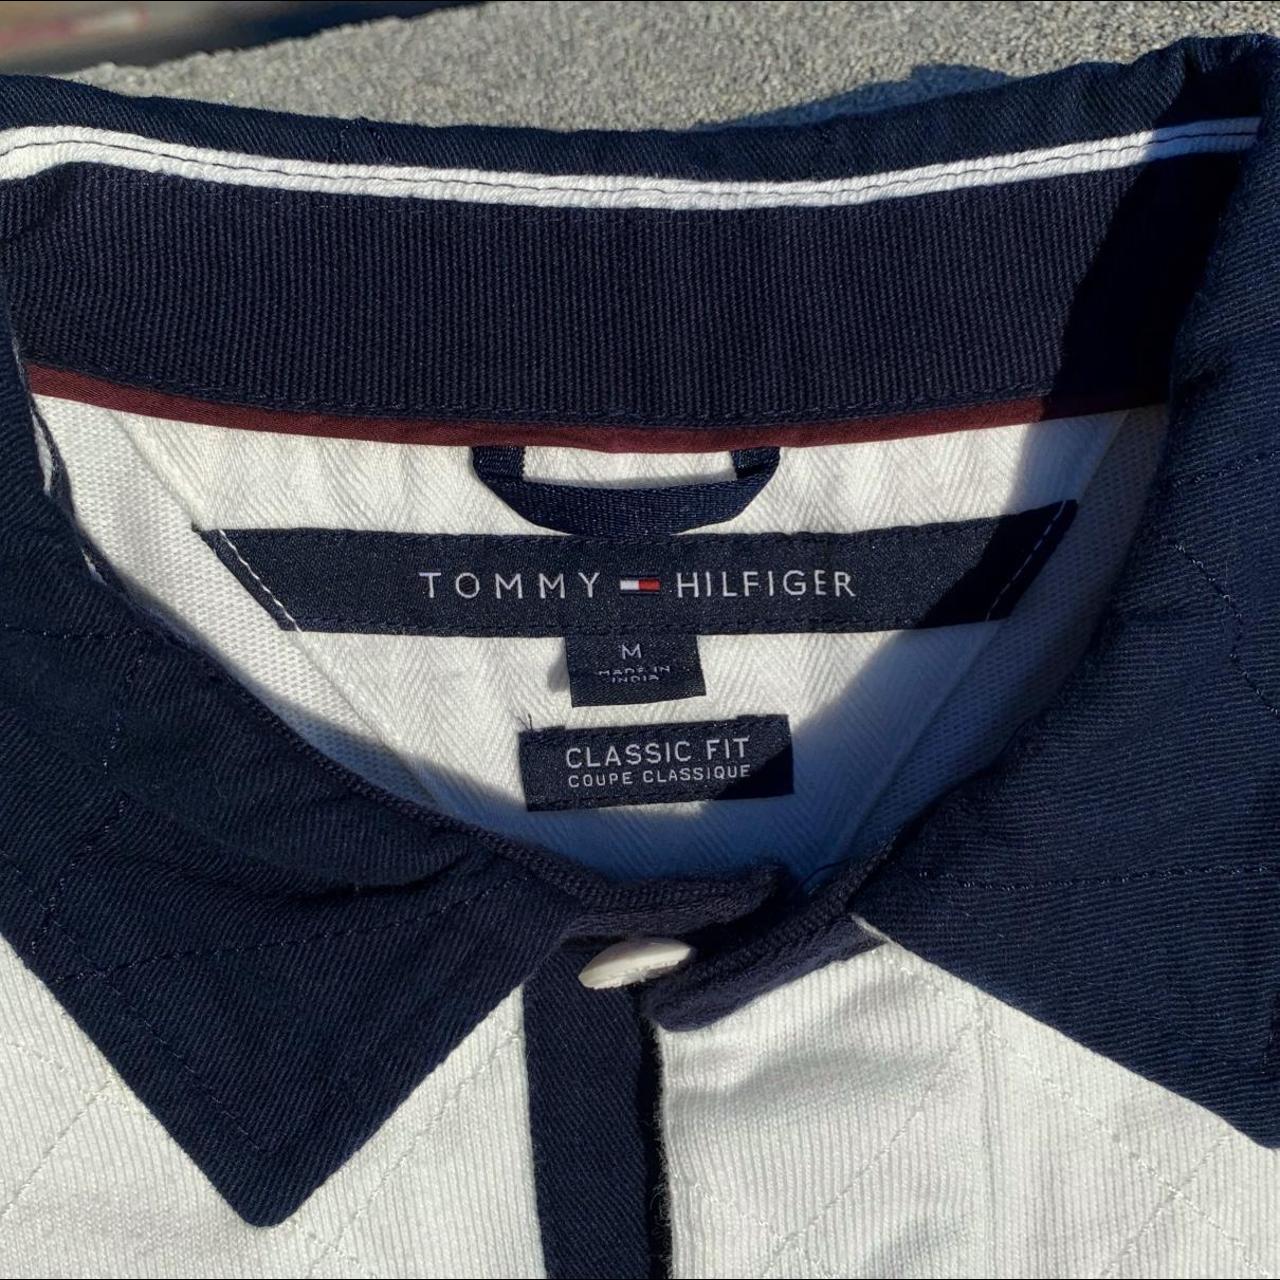 Tommy Hilfiger Rugby Polo Long Sleeve Shirt.... - Depop